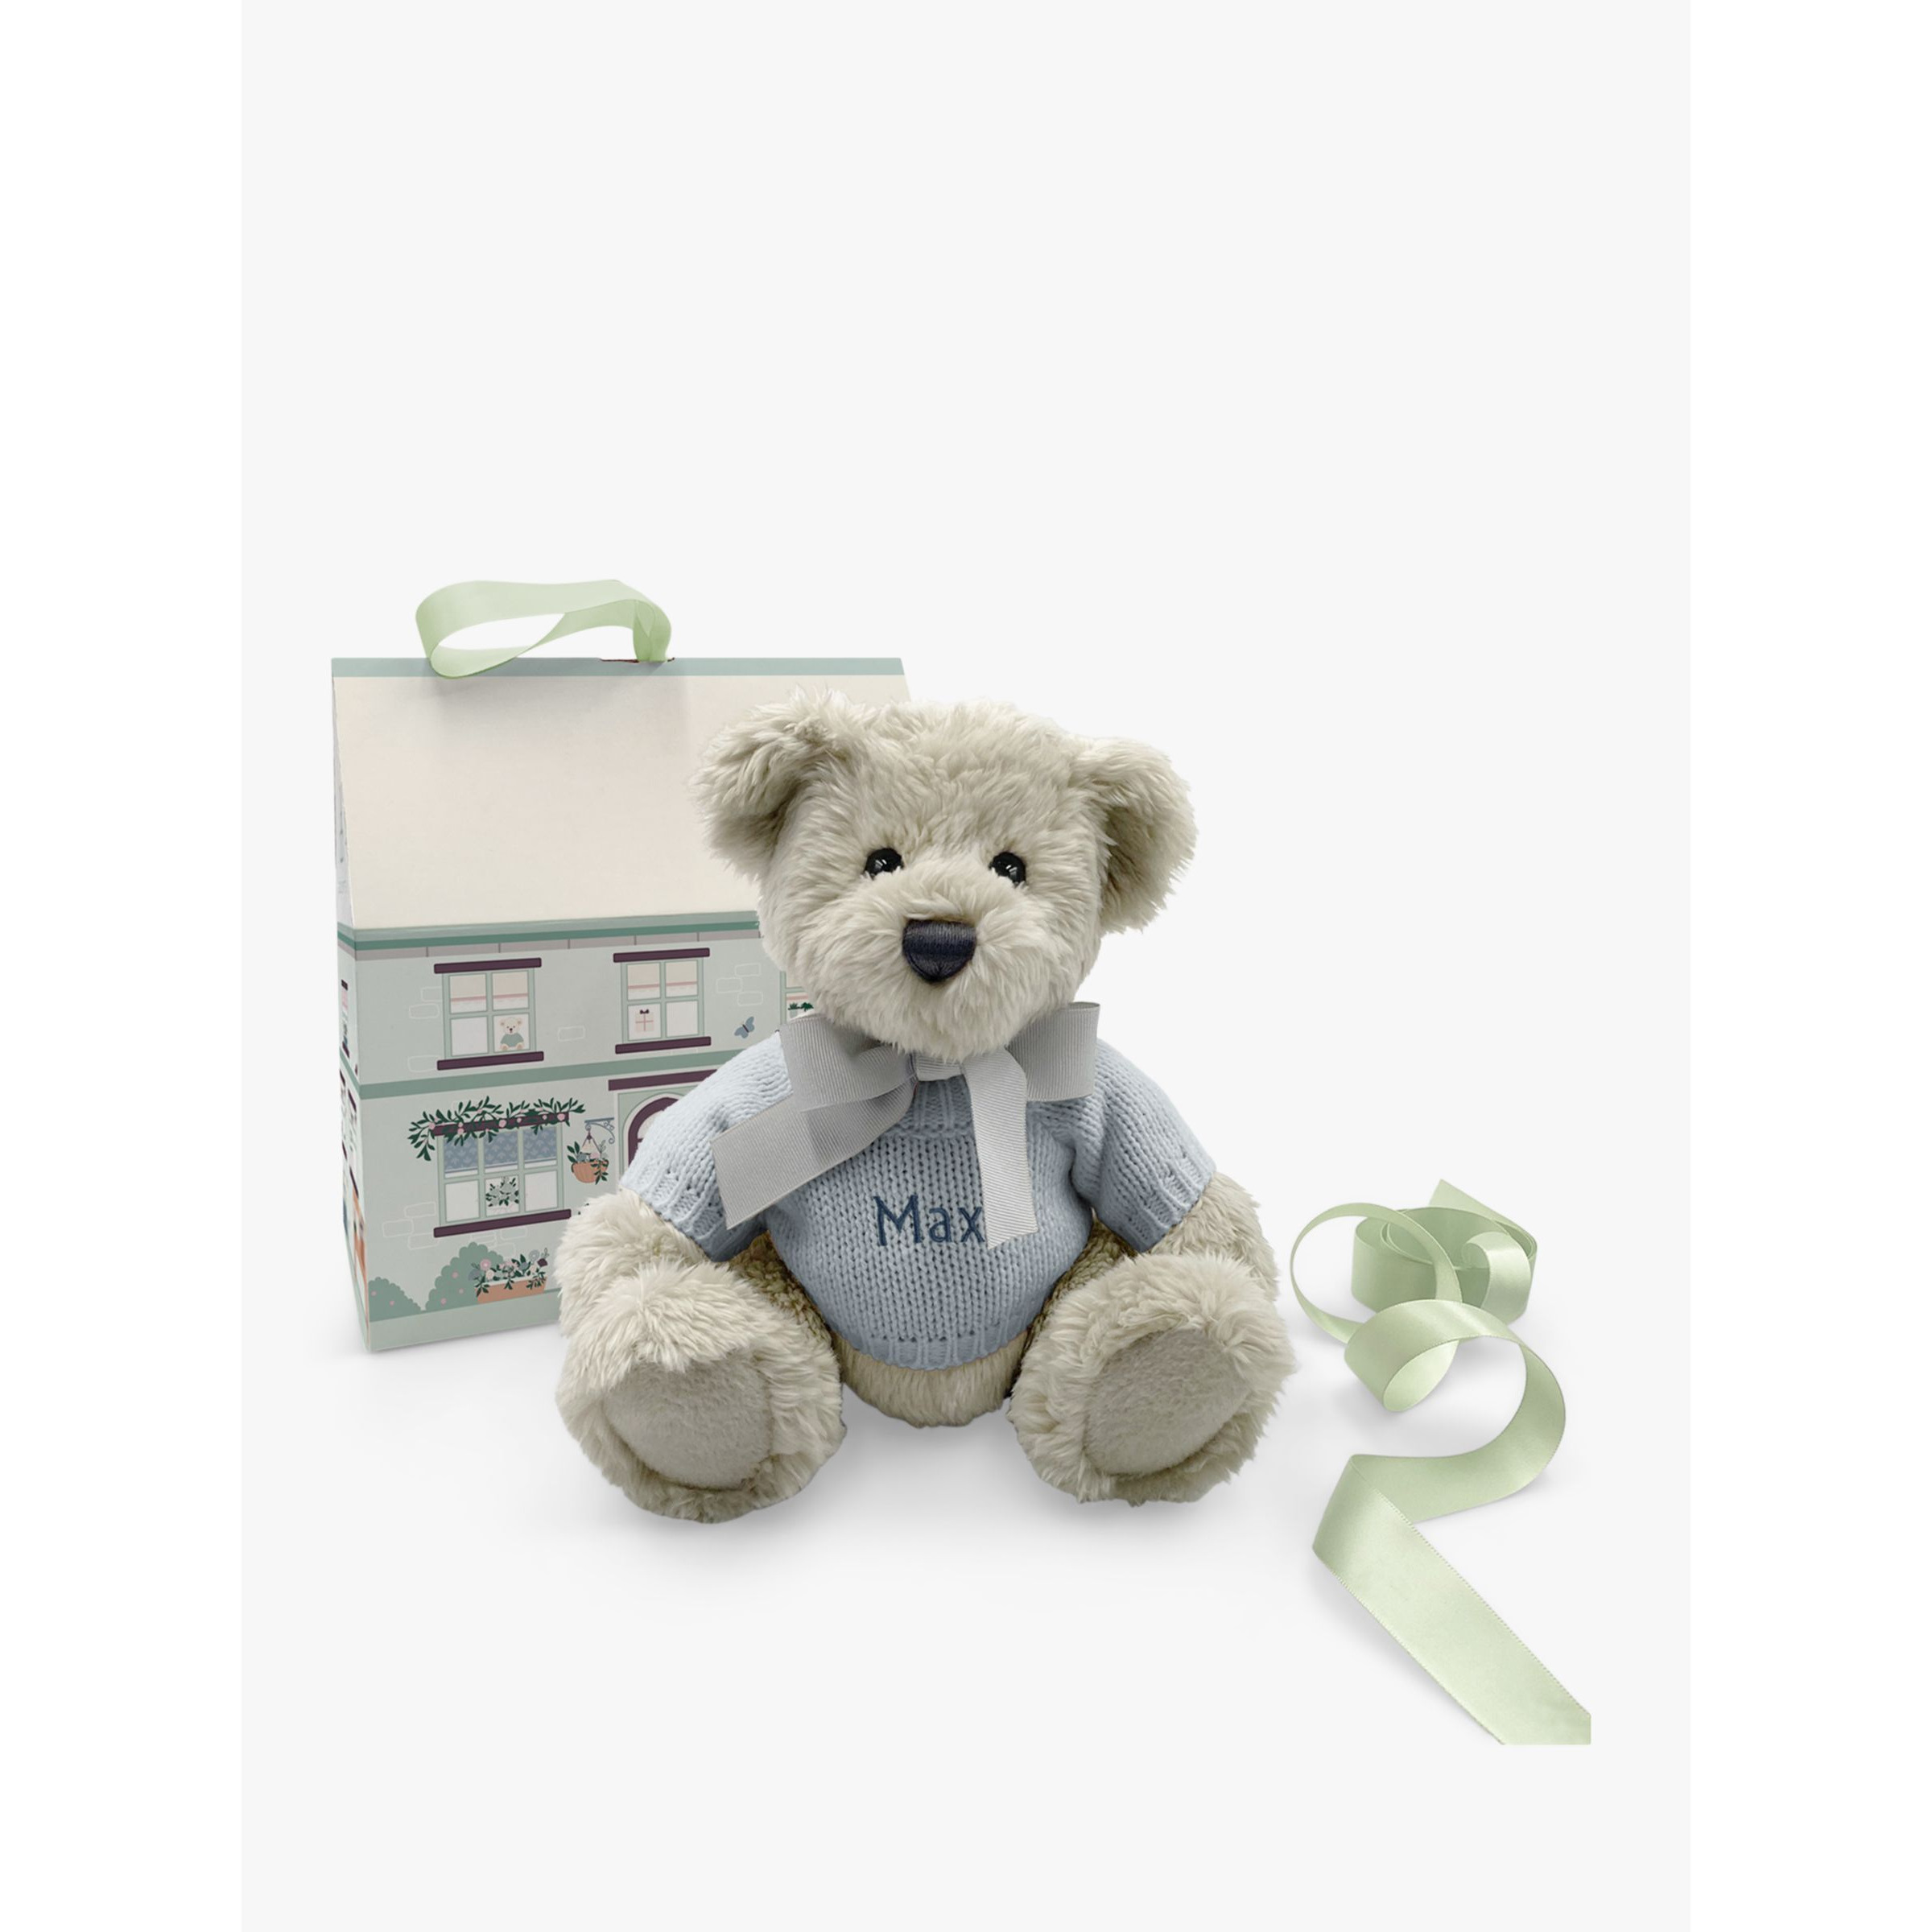 Babyblooms Personalised Berkeley Bear Soft Toy with Bear House Box, Light Blue - image 1